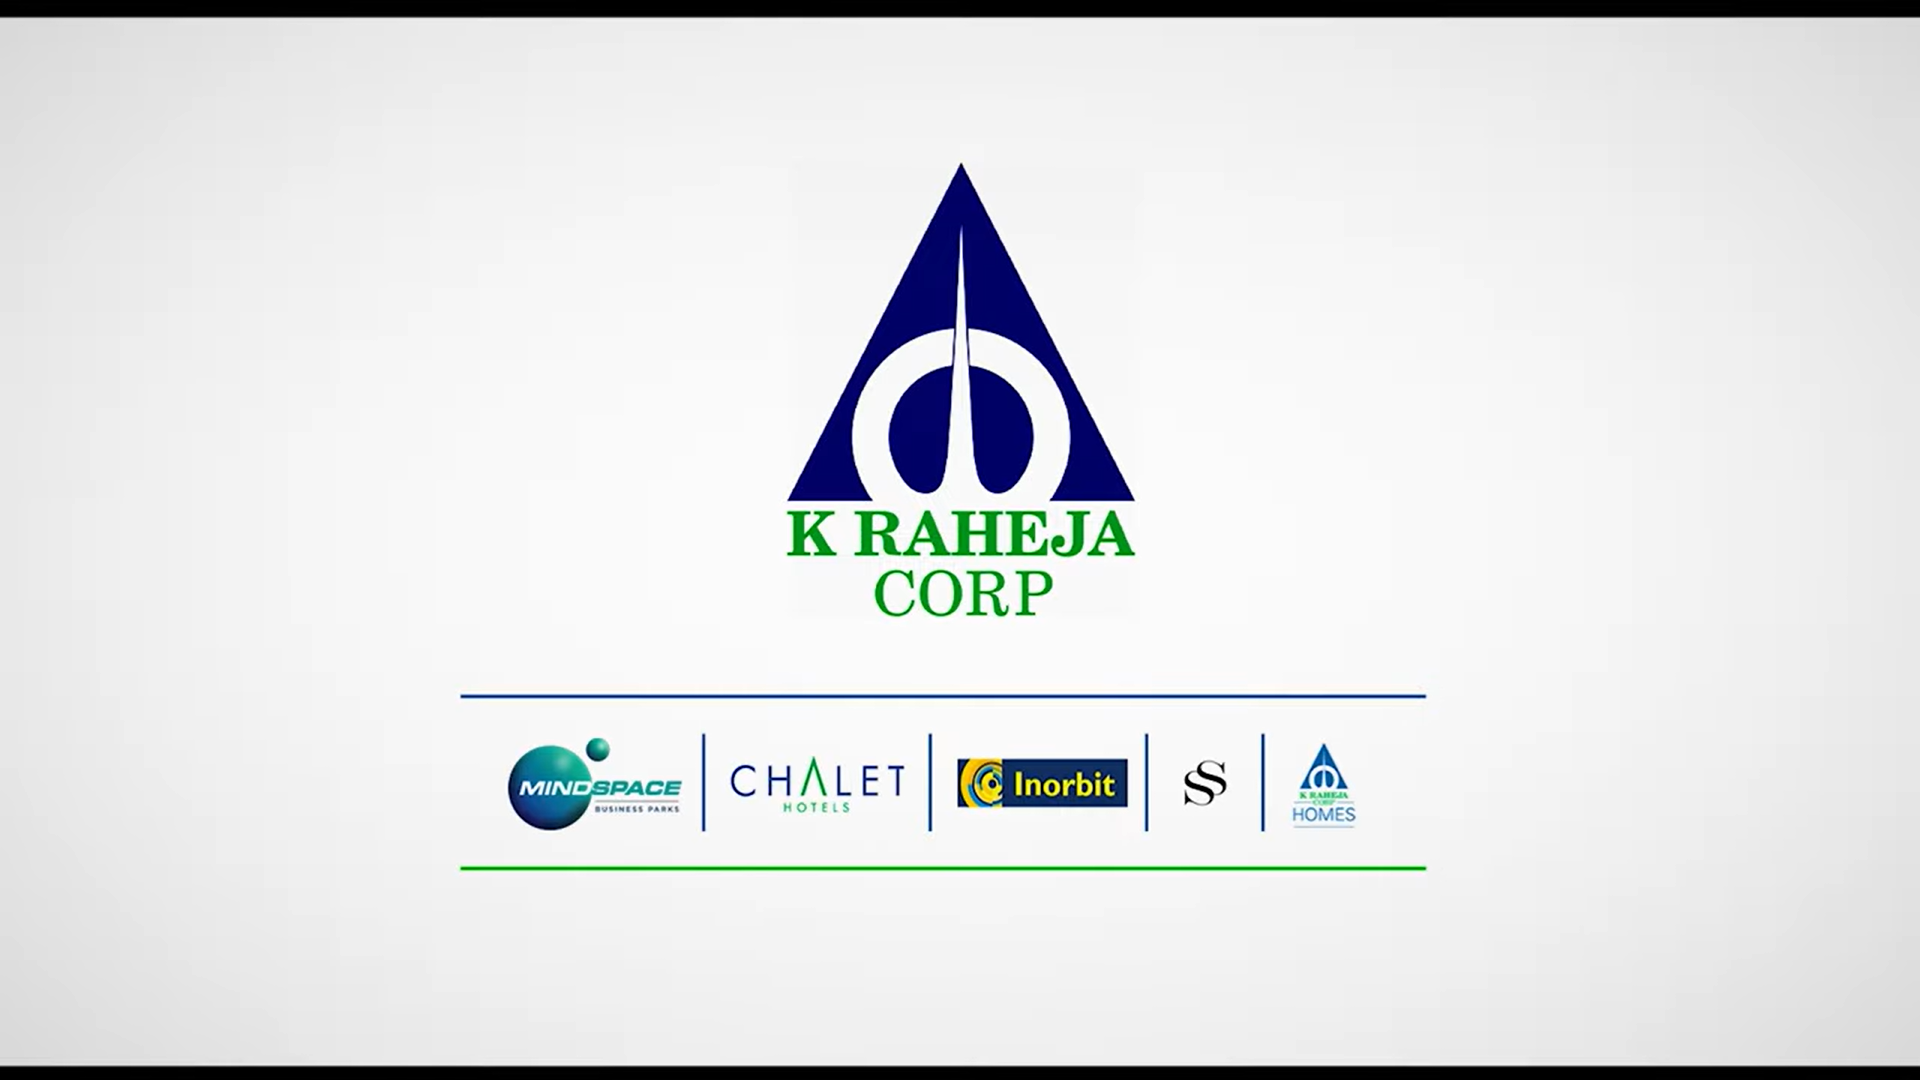 K Raheja Corp Marks Independence Day With Music From Const Sites